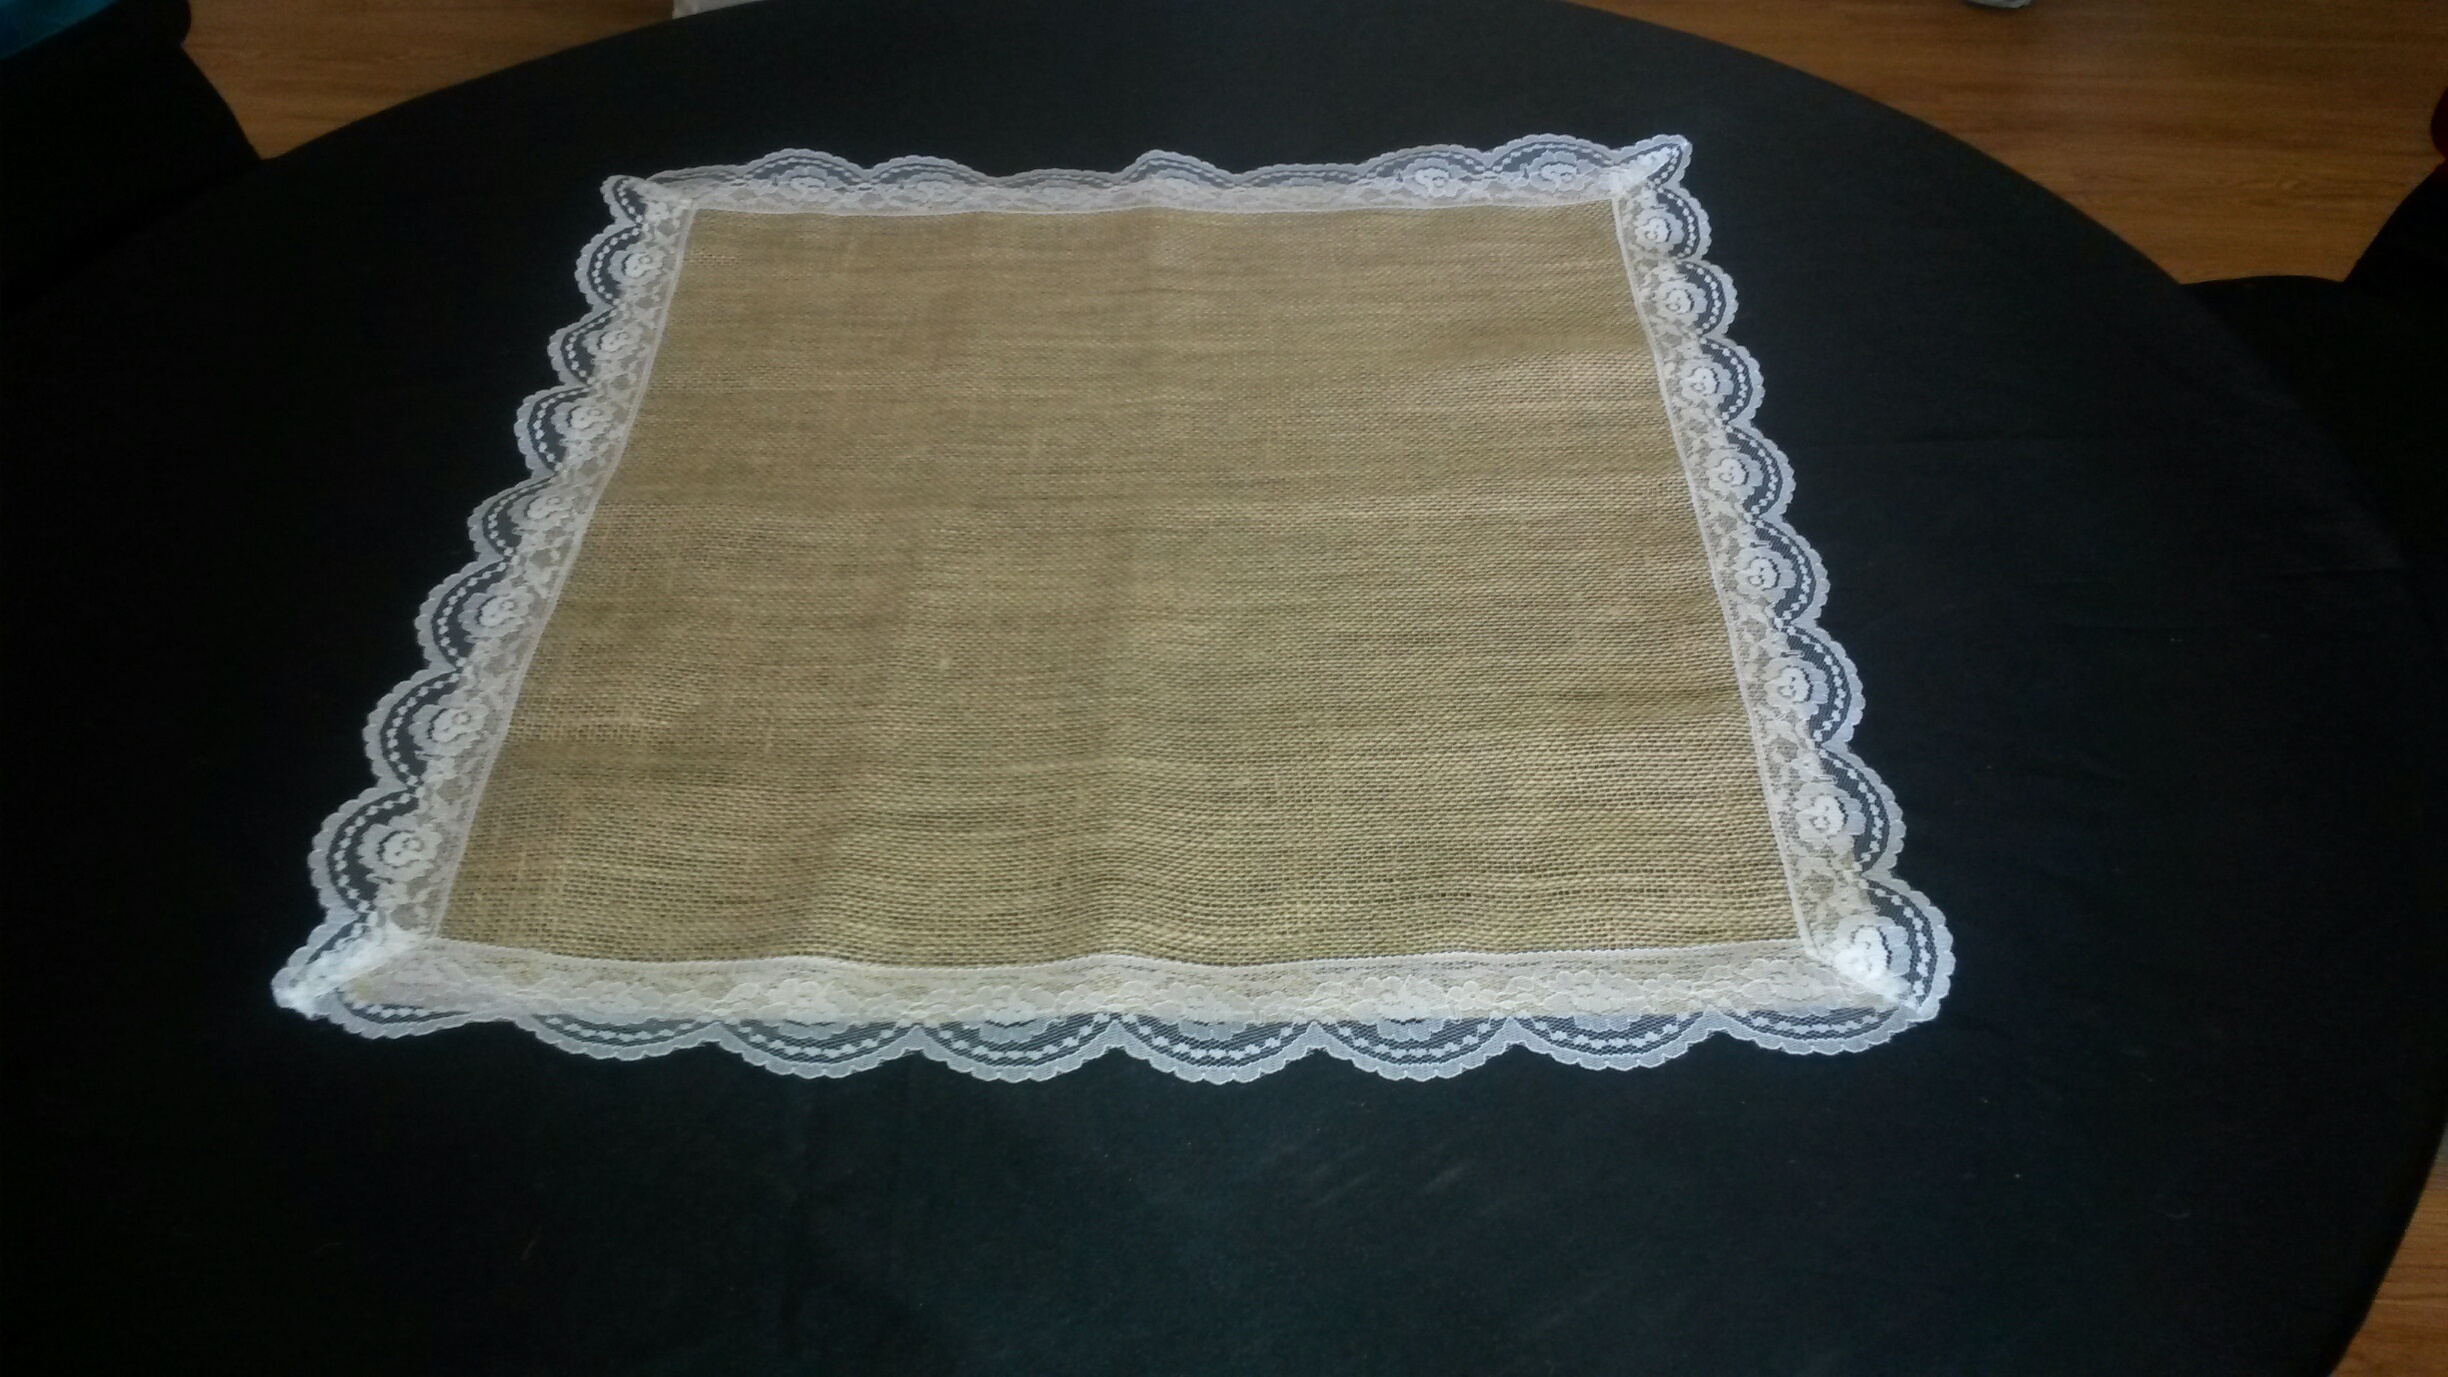 Burlap Square with White Lace